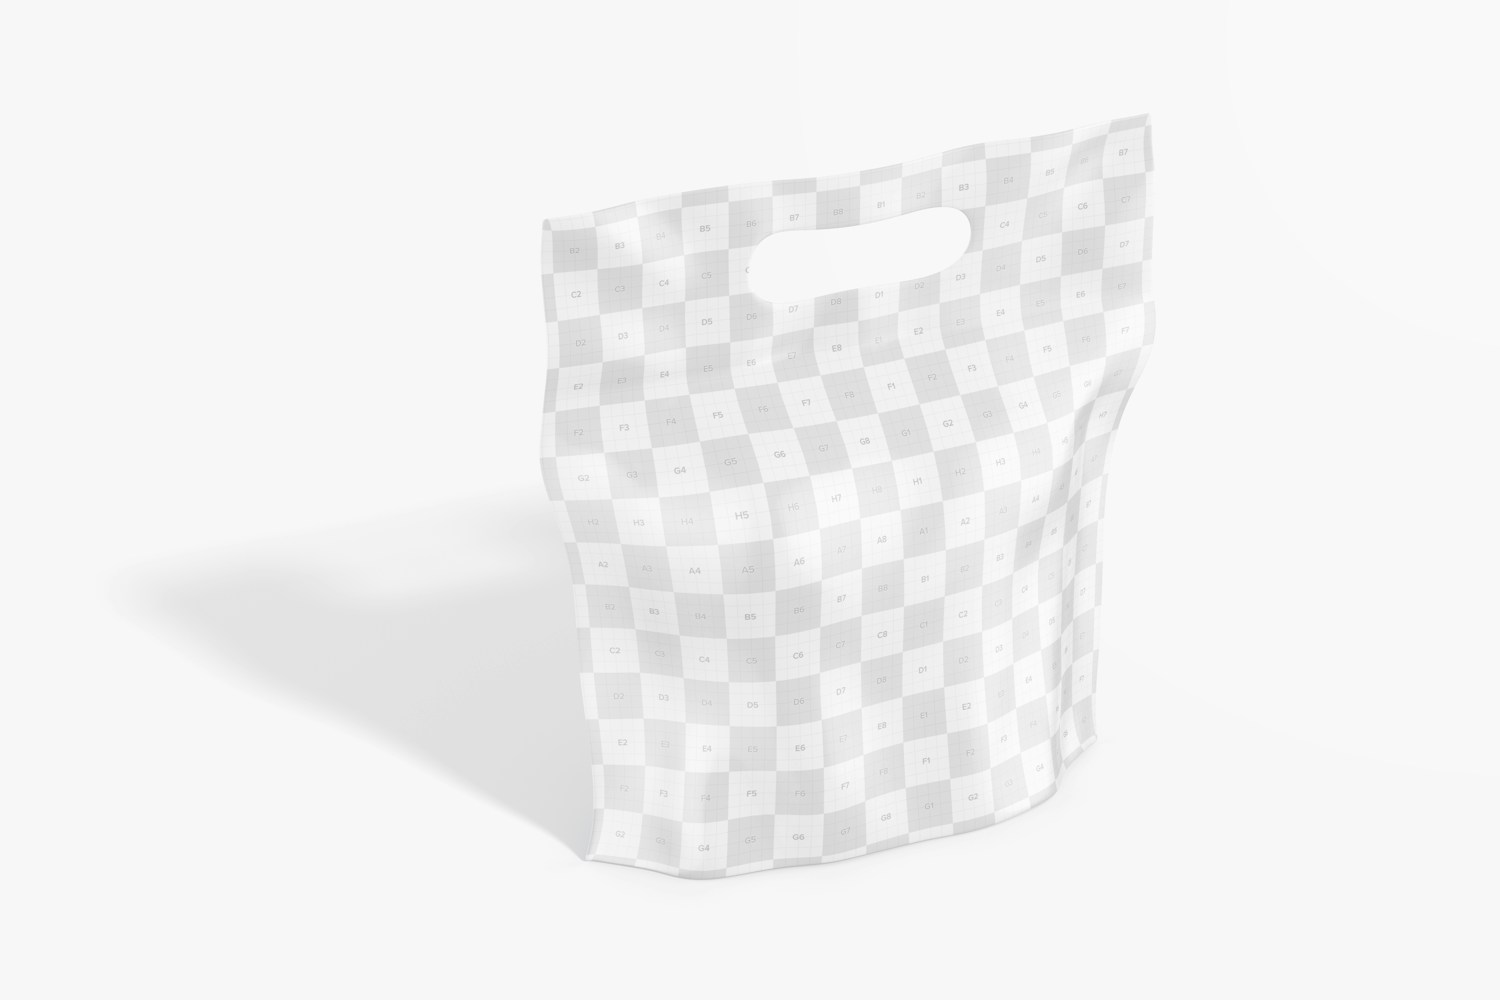 Fruit Plastic Bag with Handle Mockup, Perspective